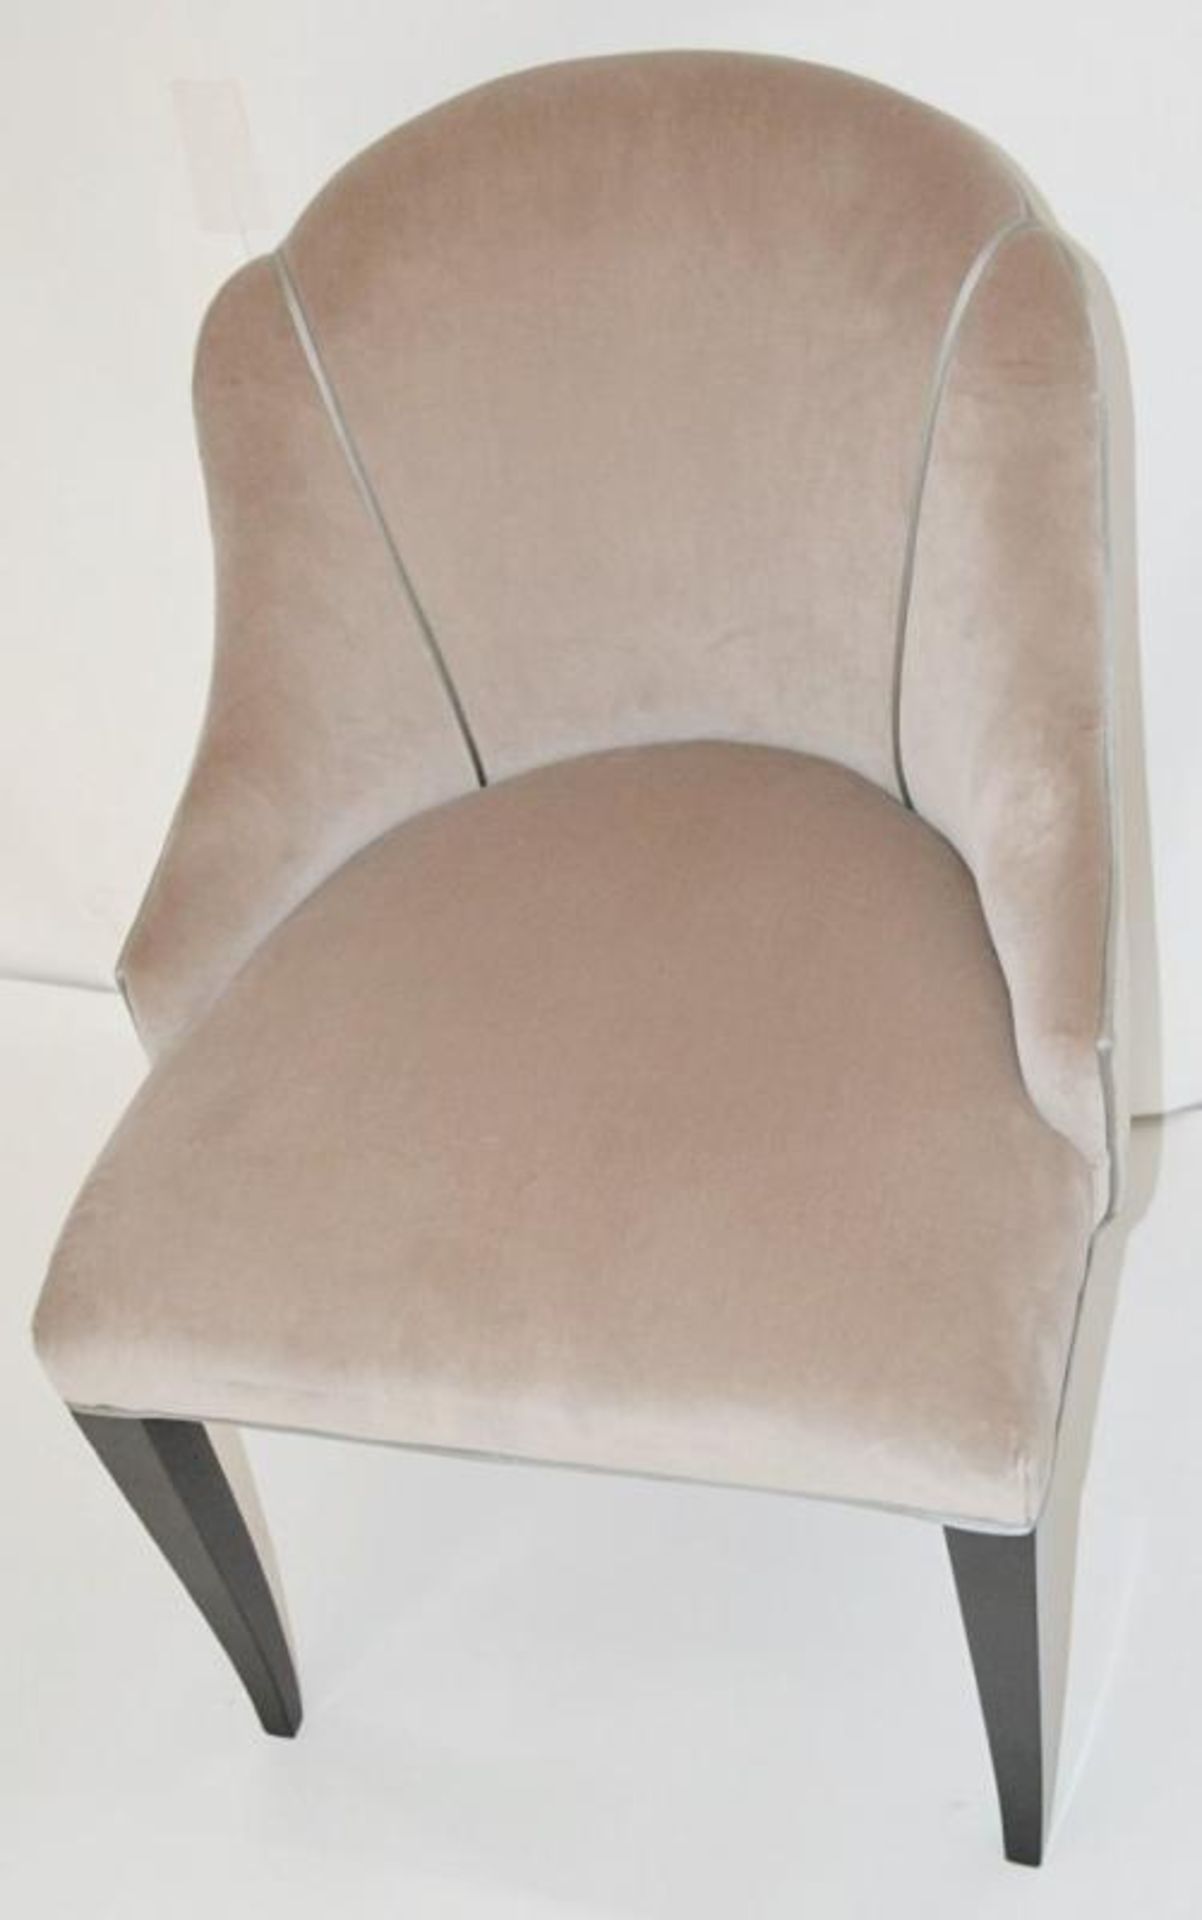 1 x REED &amp; RACKSTRAW "Cloud" Handcrafted Velvet Upholstered Chair - Dimensions: H87 x W58 x D5 - Image 2 of 14